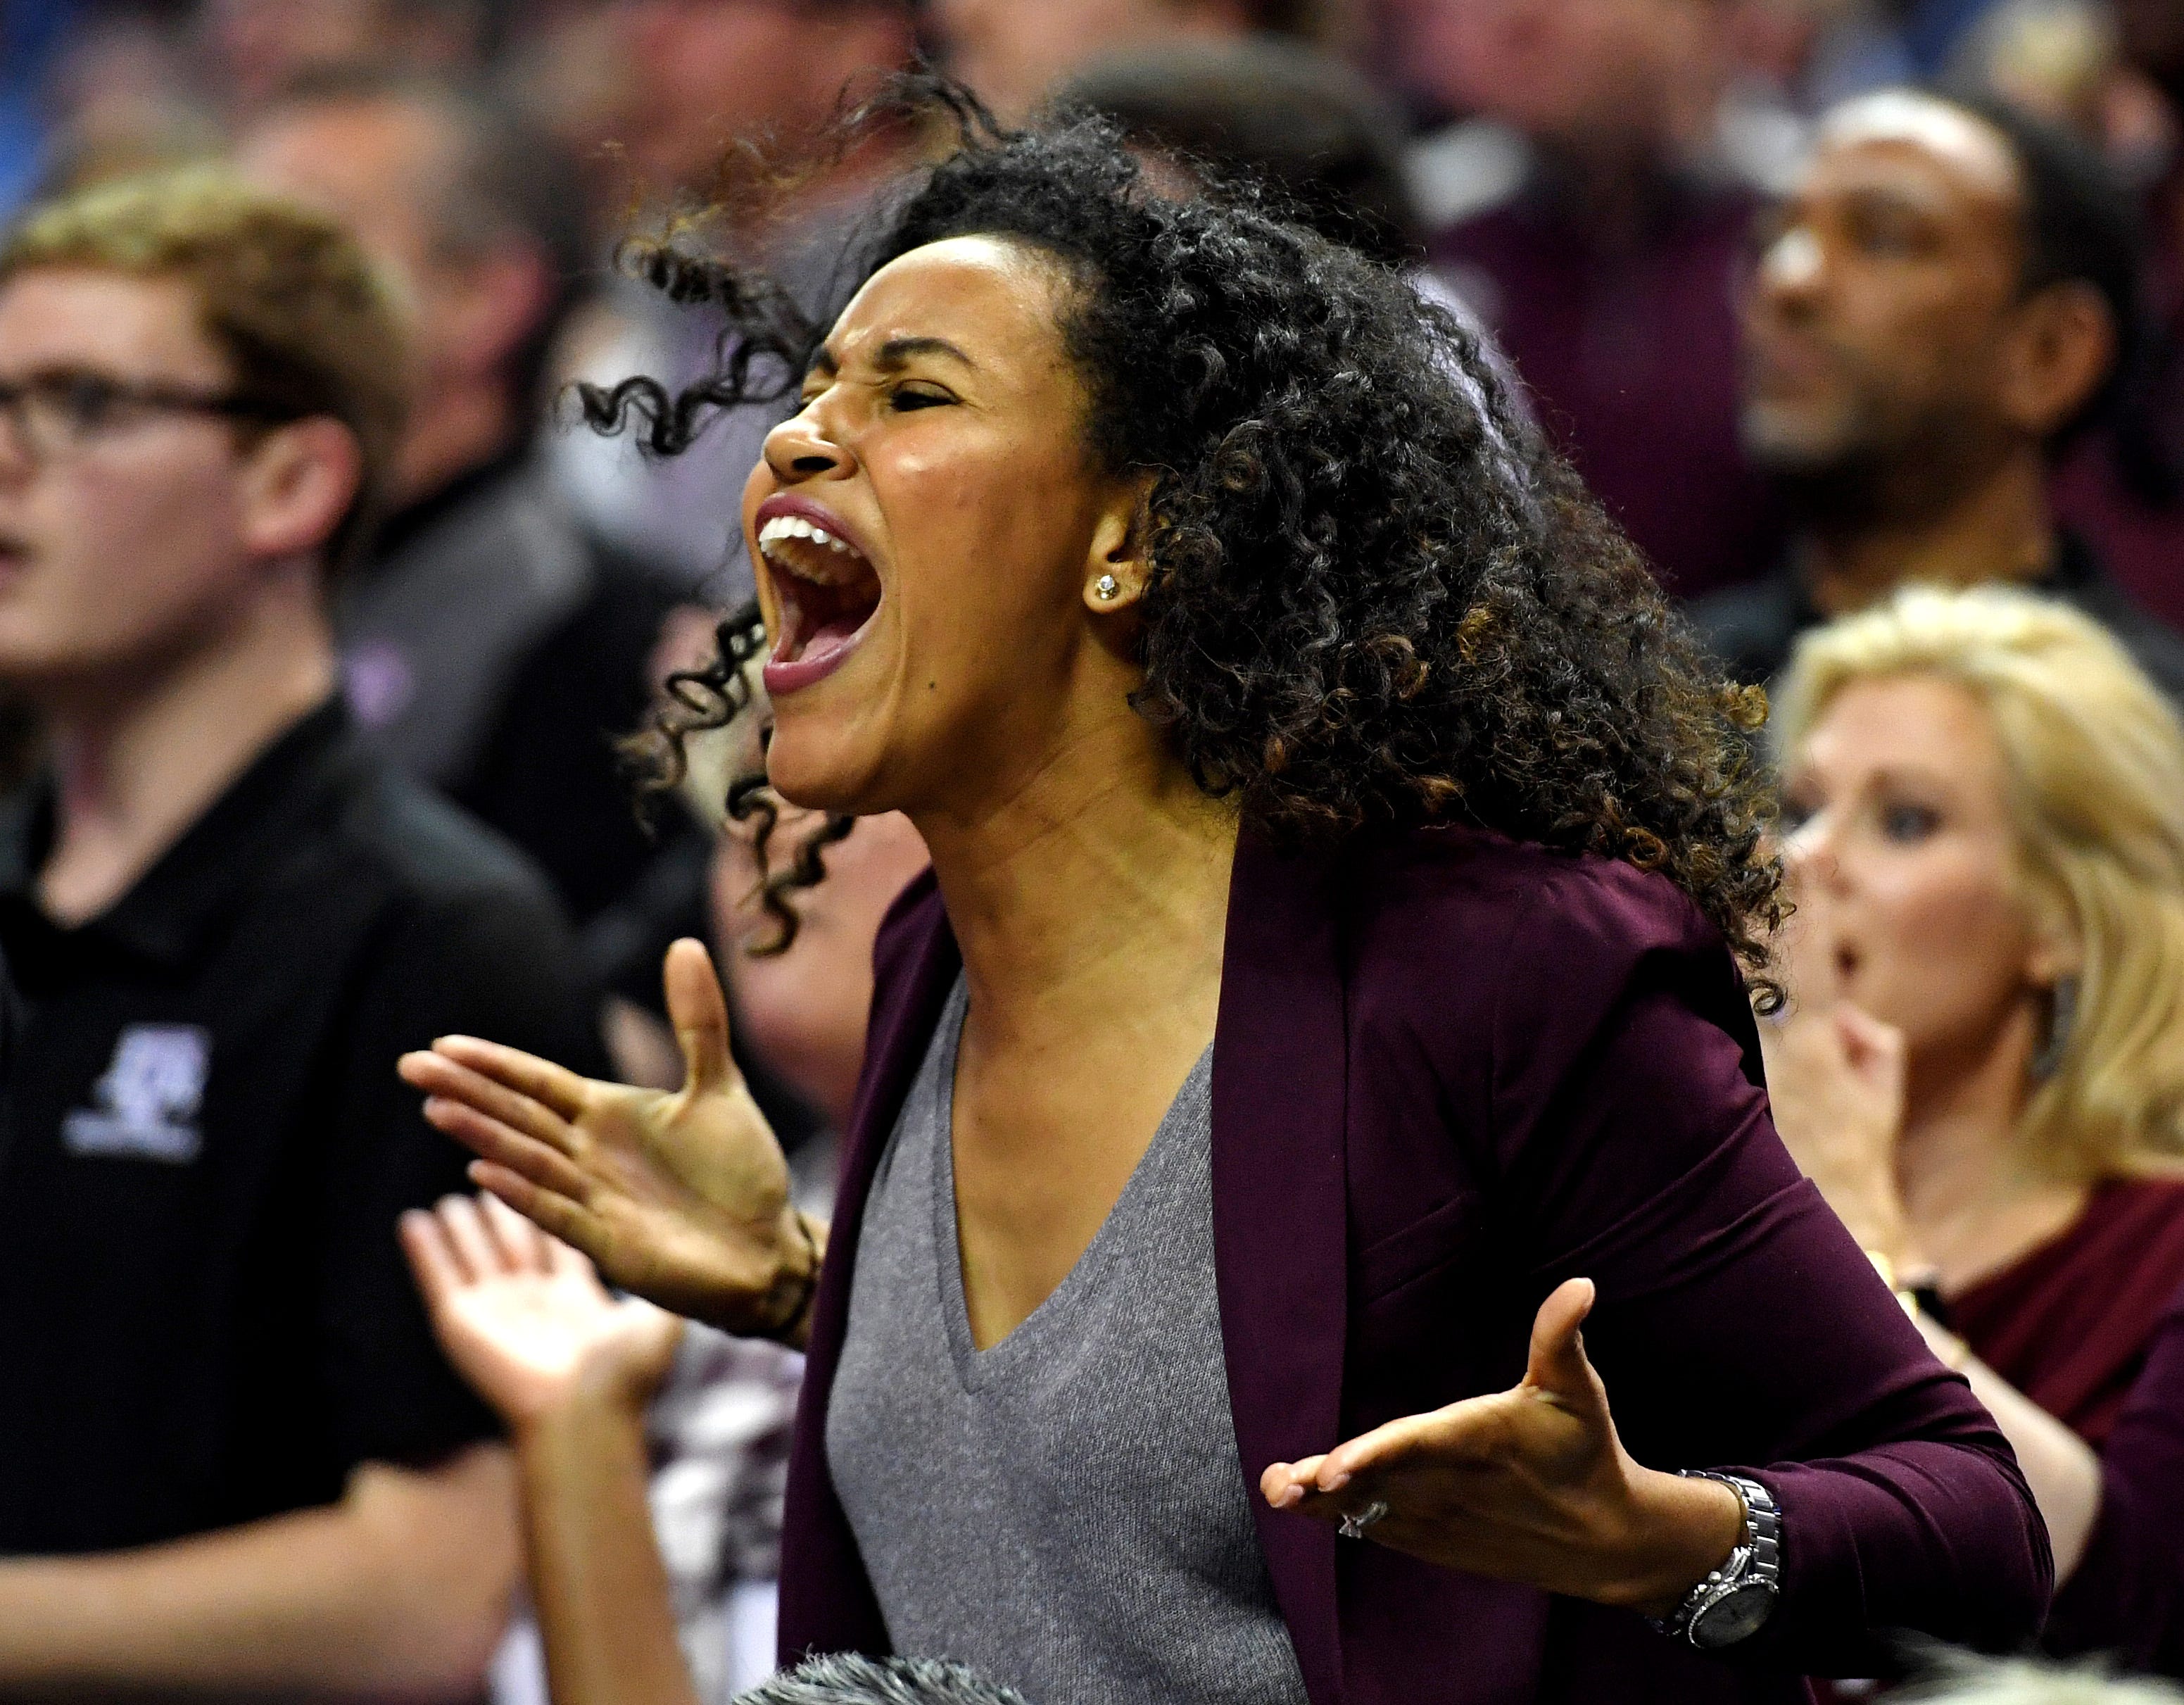 A Texas A&M Aggies fan cheers during the second half against the North Carolina Tar Heels in the second round of the 2018 NCAA Tournament at Spectrum Center in Charlotte, N.C.